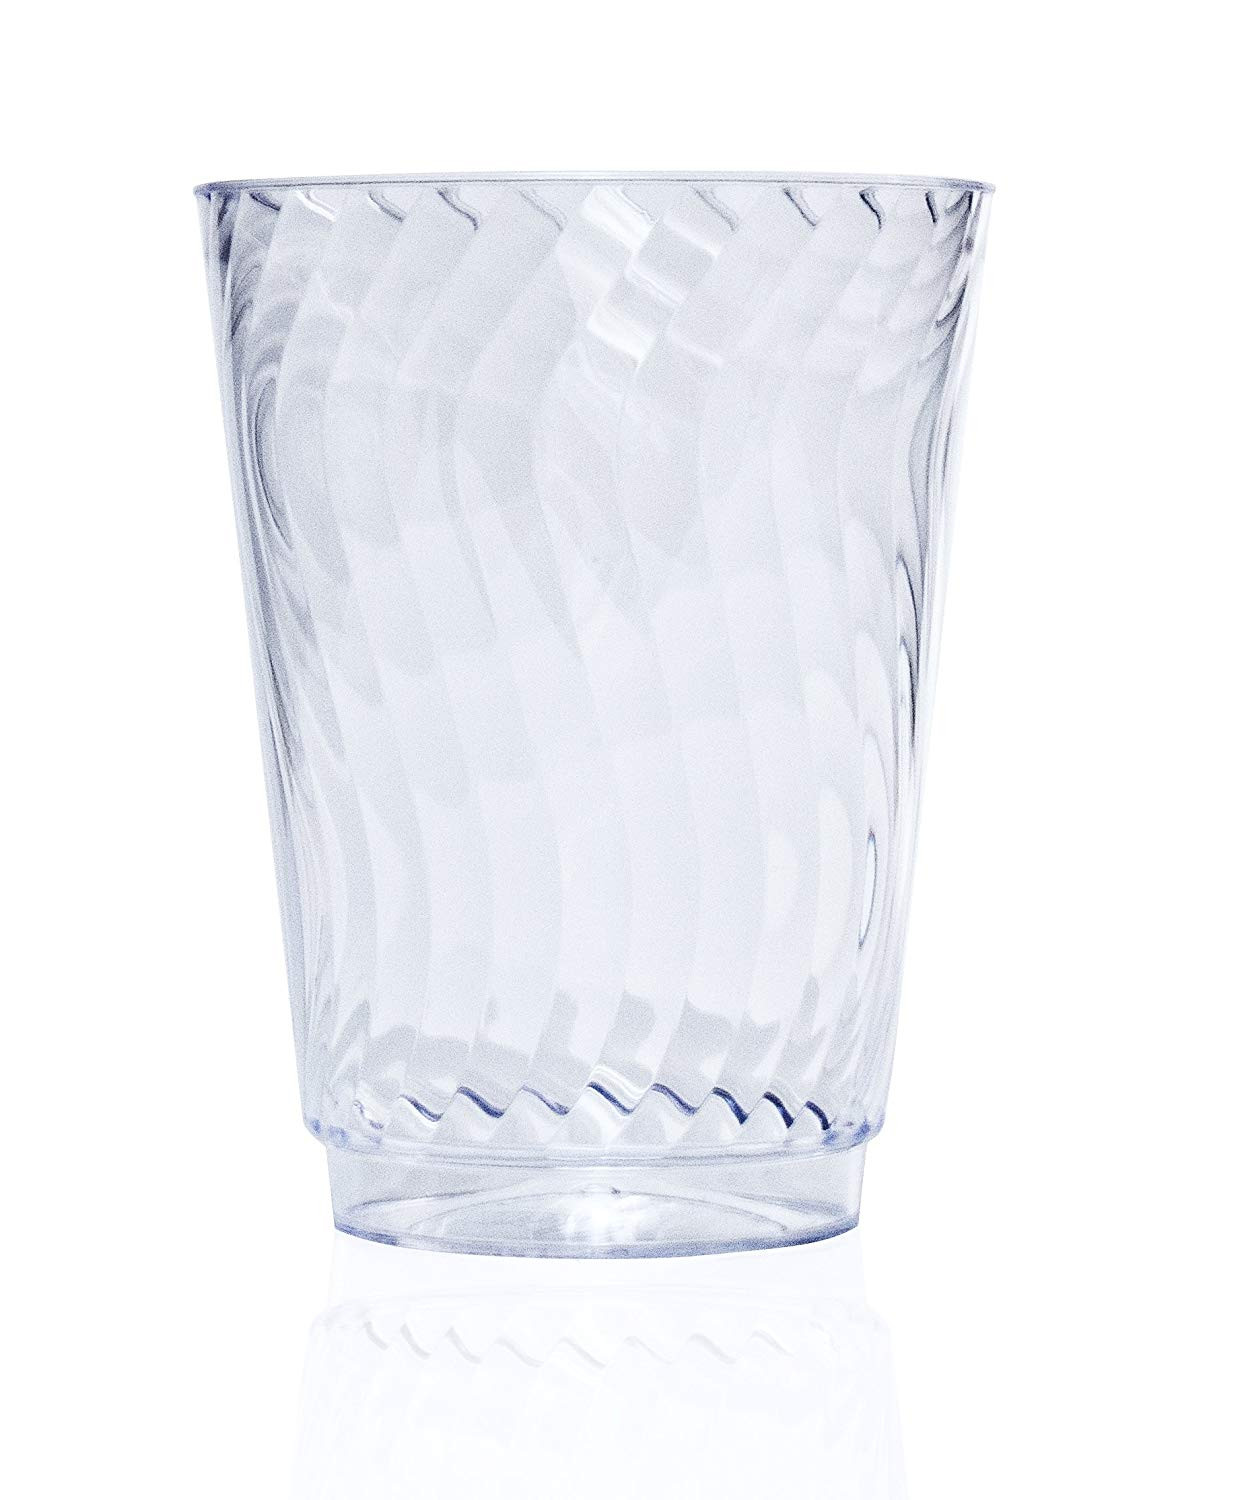 13 Popular Heavy Cut Glass Vase 2024 free download heavy cut glass vase of amazon com chinet cut crystal tumblers 14 ounce 108 count within amazon com chinet cut crystal tumblers 14 ounce 108 count tumblers health personal care